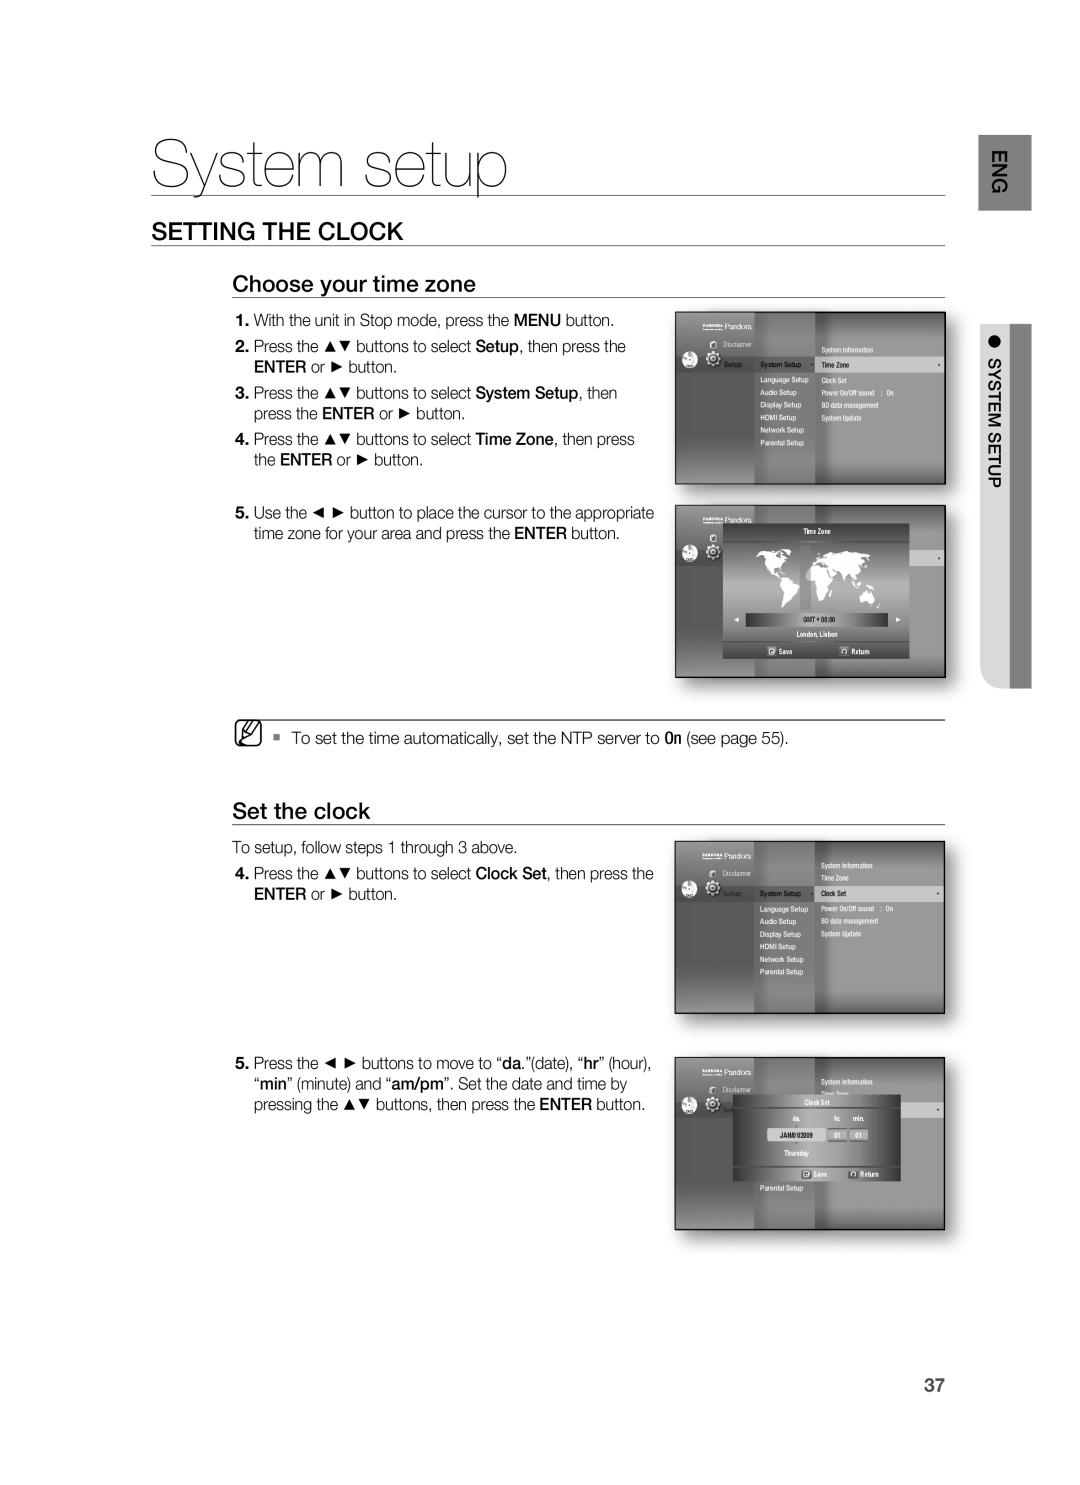 Samsung HT-BD1200, AH68-02178Z System setup, Setting The Clock, Choose your time zone, Set the clock, Gmt +, JAN/01/2009 